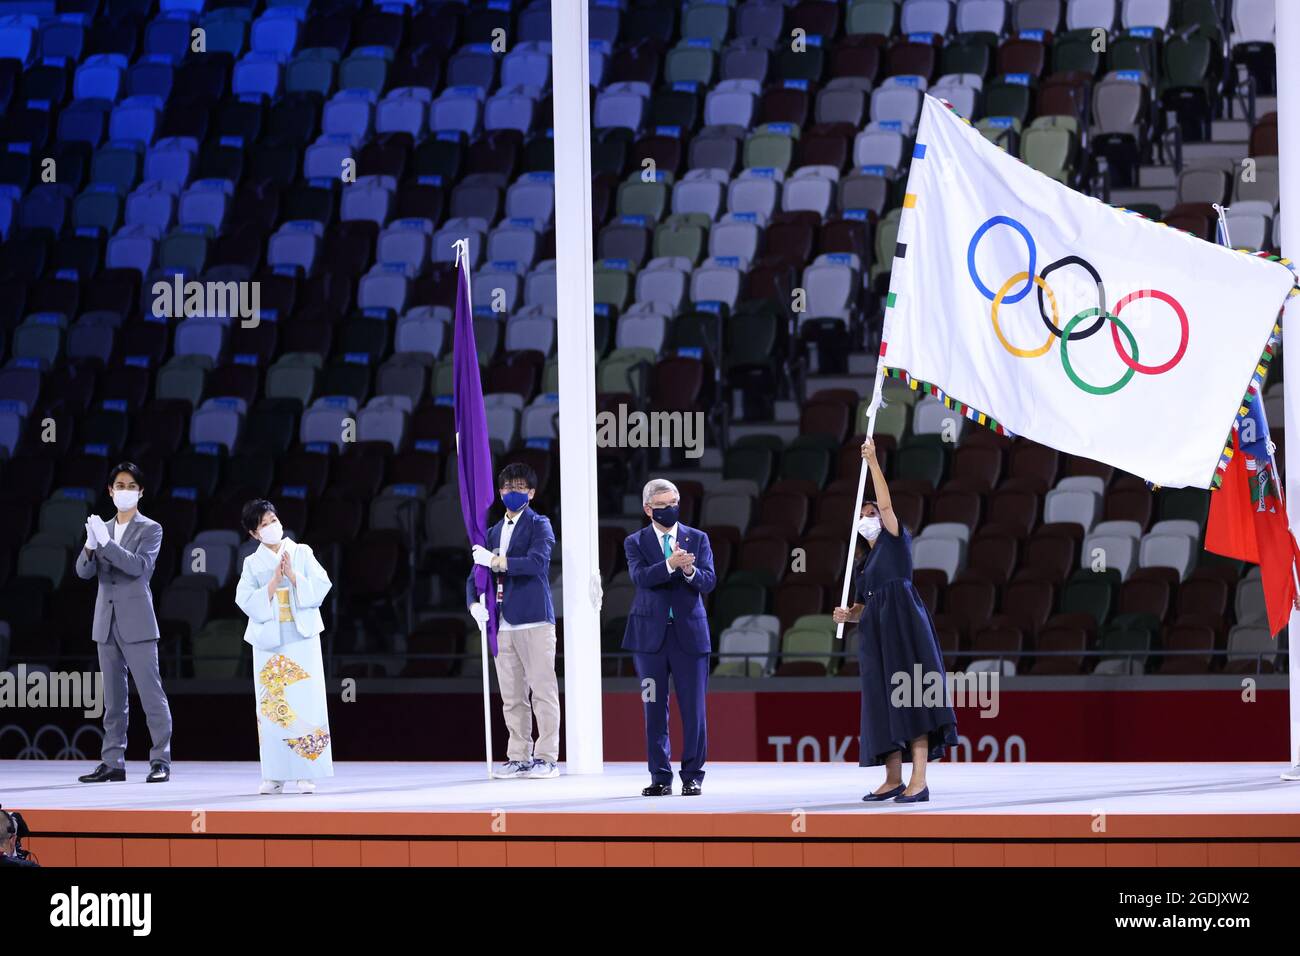 Anne Hidalgo Paris Mayor waves the Olympic flag, AUGUST 8, 2021 : Tokyo 2020 Olympic Games Closing Ceremony at the Olympic Stadium in Tokyo, Japan. Credit: Yohei Osada/AFLO SPORT/Alamy Live News Stock Photo